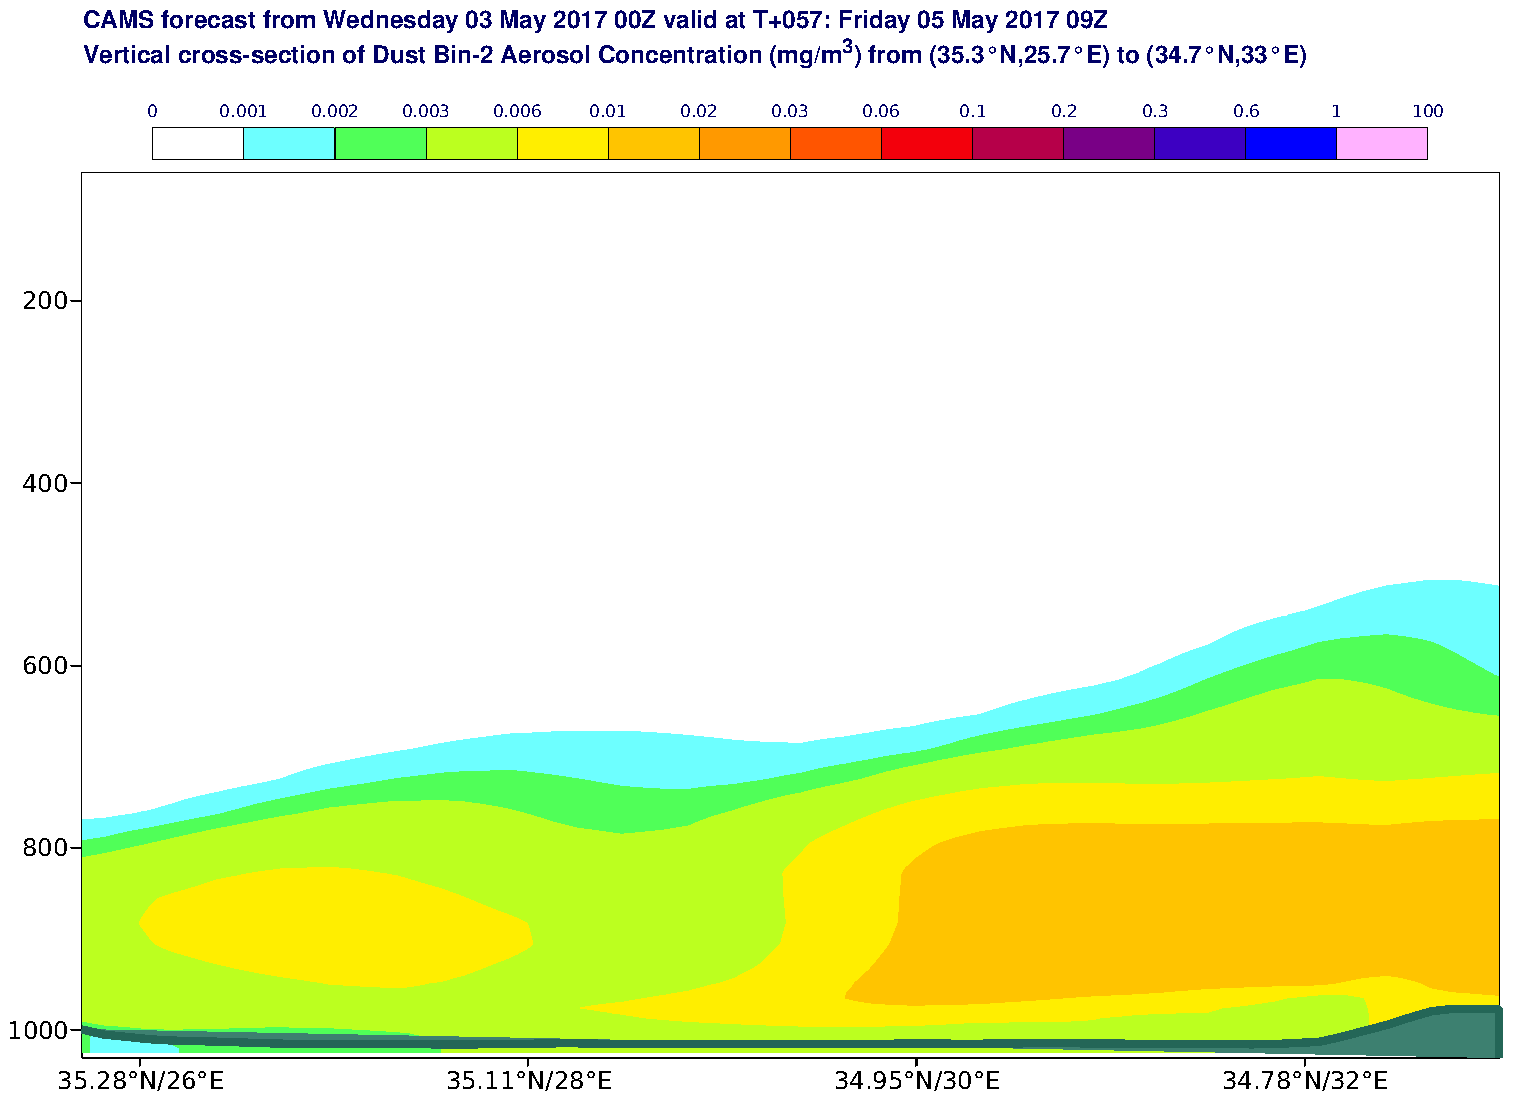 Vertical cross-section of Dust Bin-2 Aerosol Concentration (mg/m3) valid at T57 - 2017-05-05 09:00